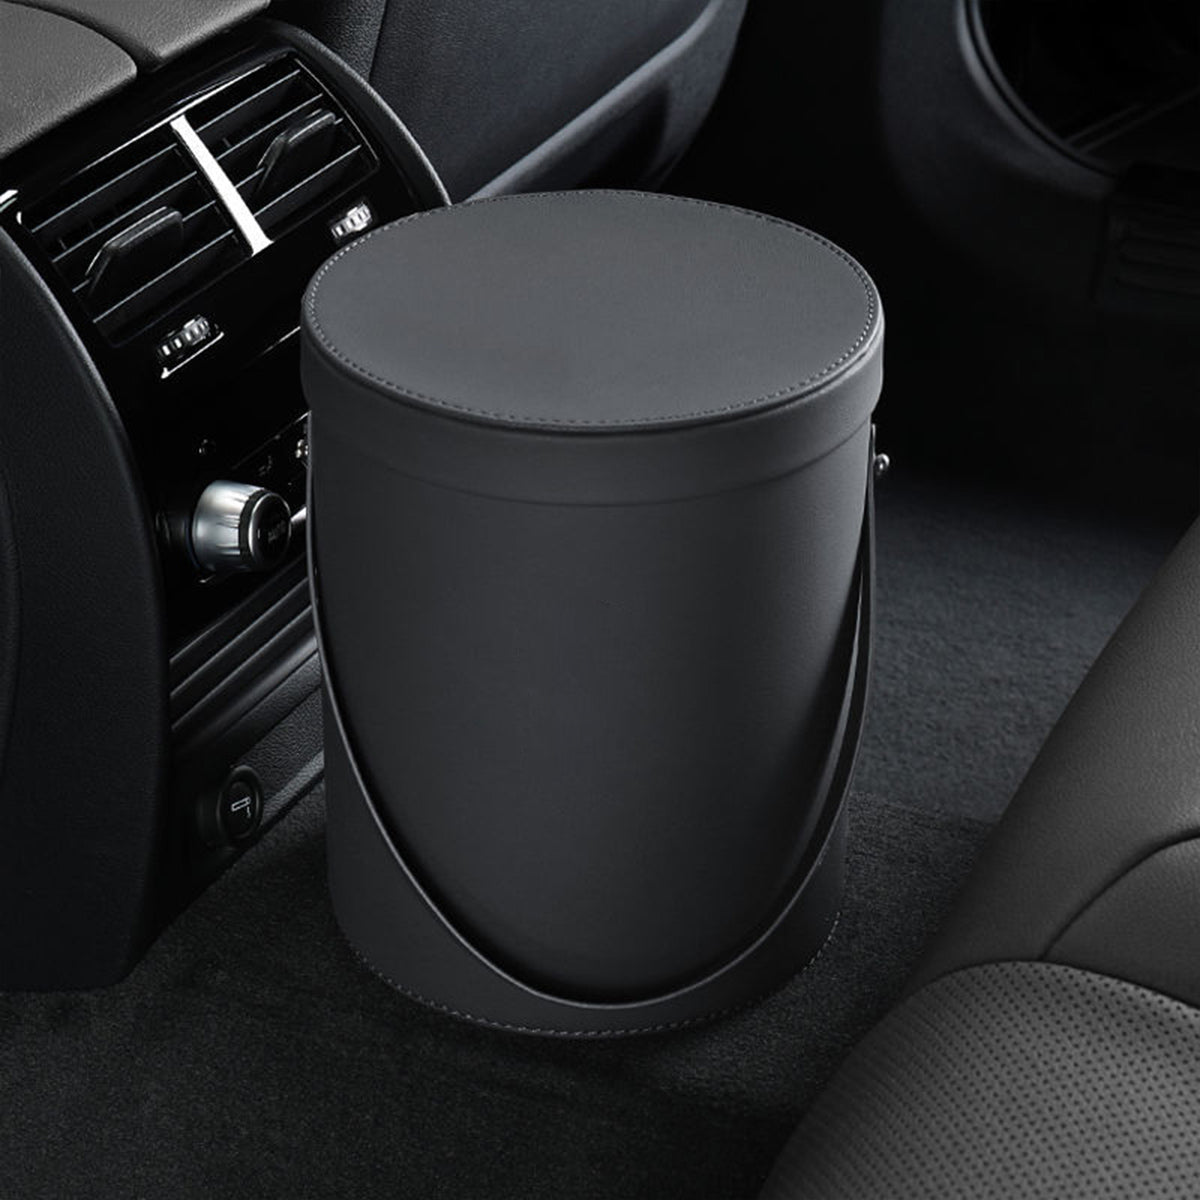 Storage Box Trash Can, Custom Fit For Your Cars, Portable Collapsible Car Trash Can, Leather Waterproof Small Mini Car Garbage Can Waste Basket, Car Accessories SU15989